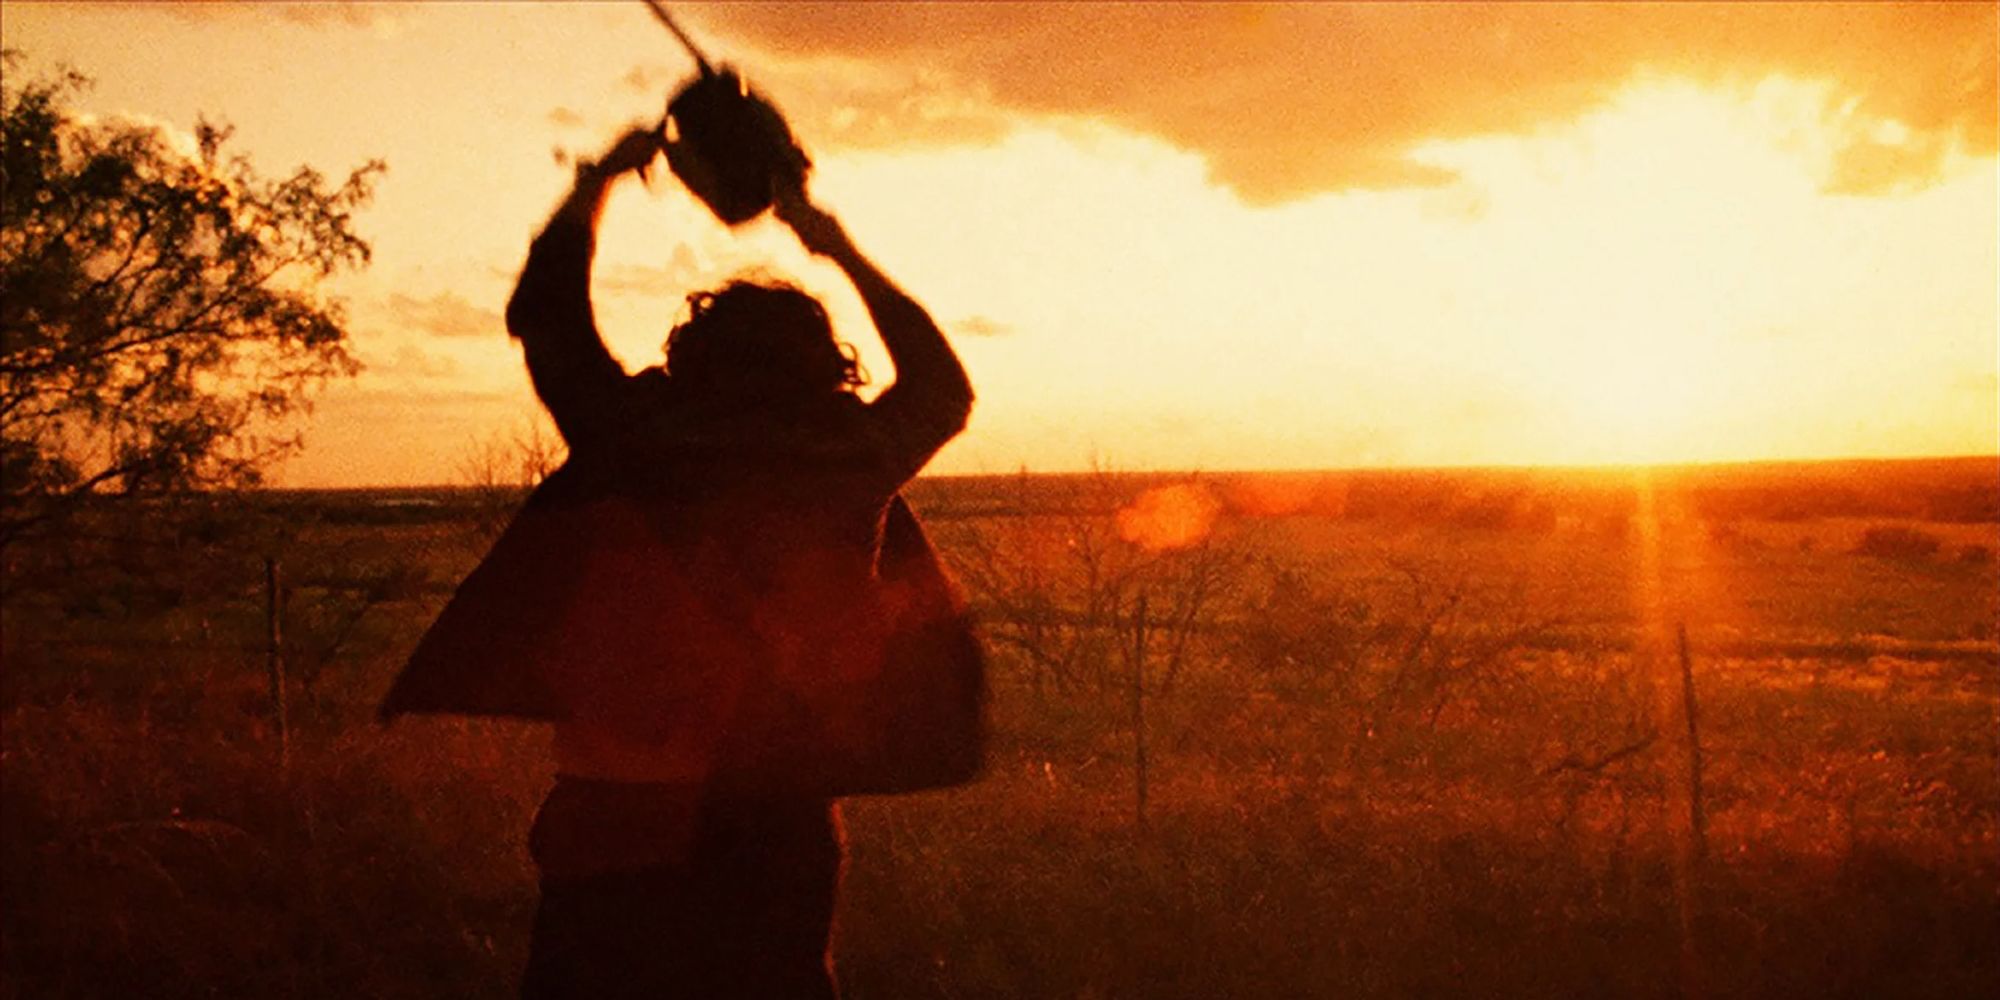 Leatherface swinging his chainsaw around in The Texas Chain Saw Massacre